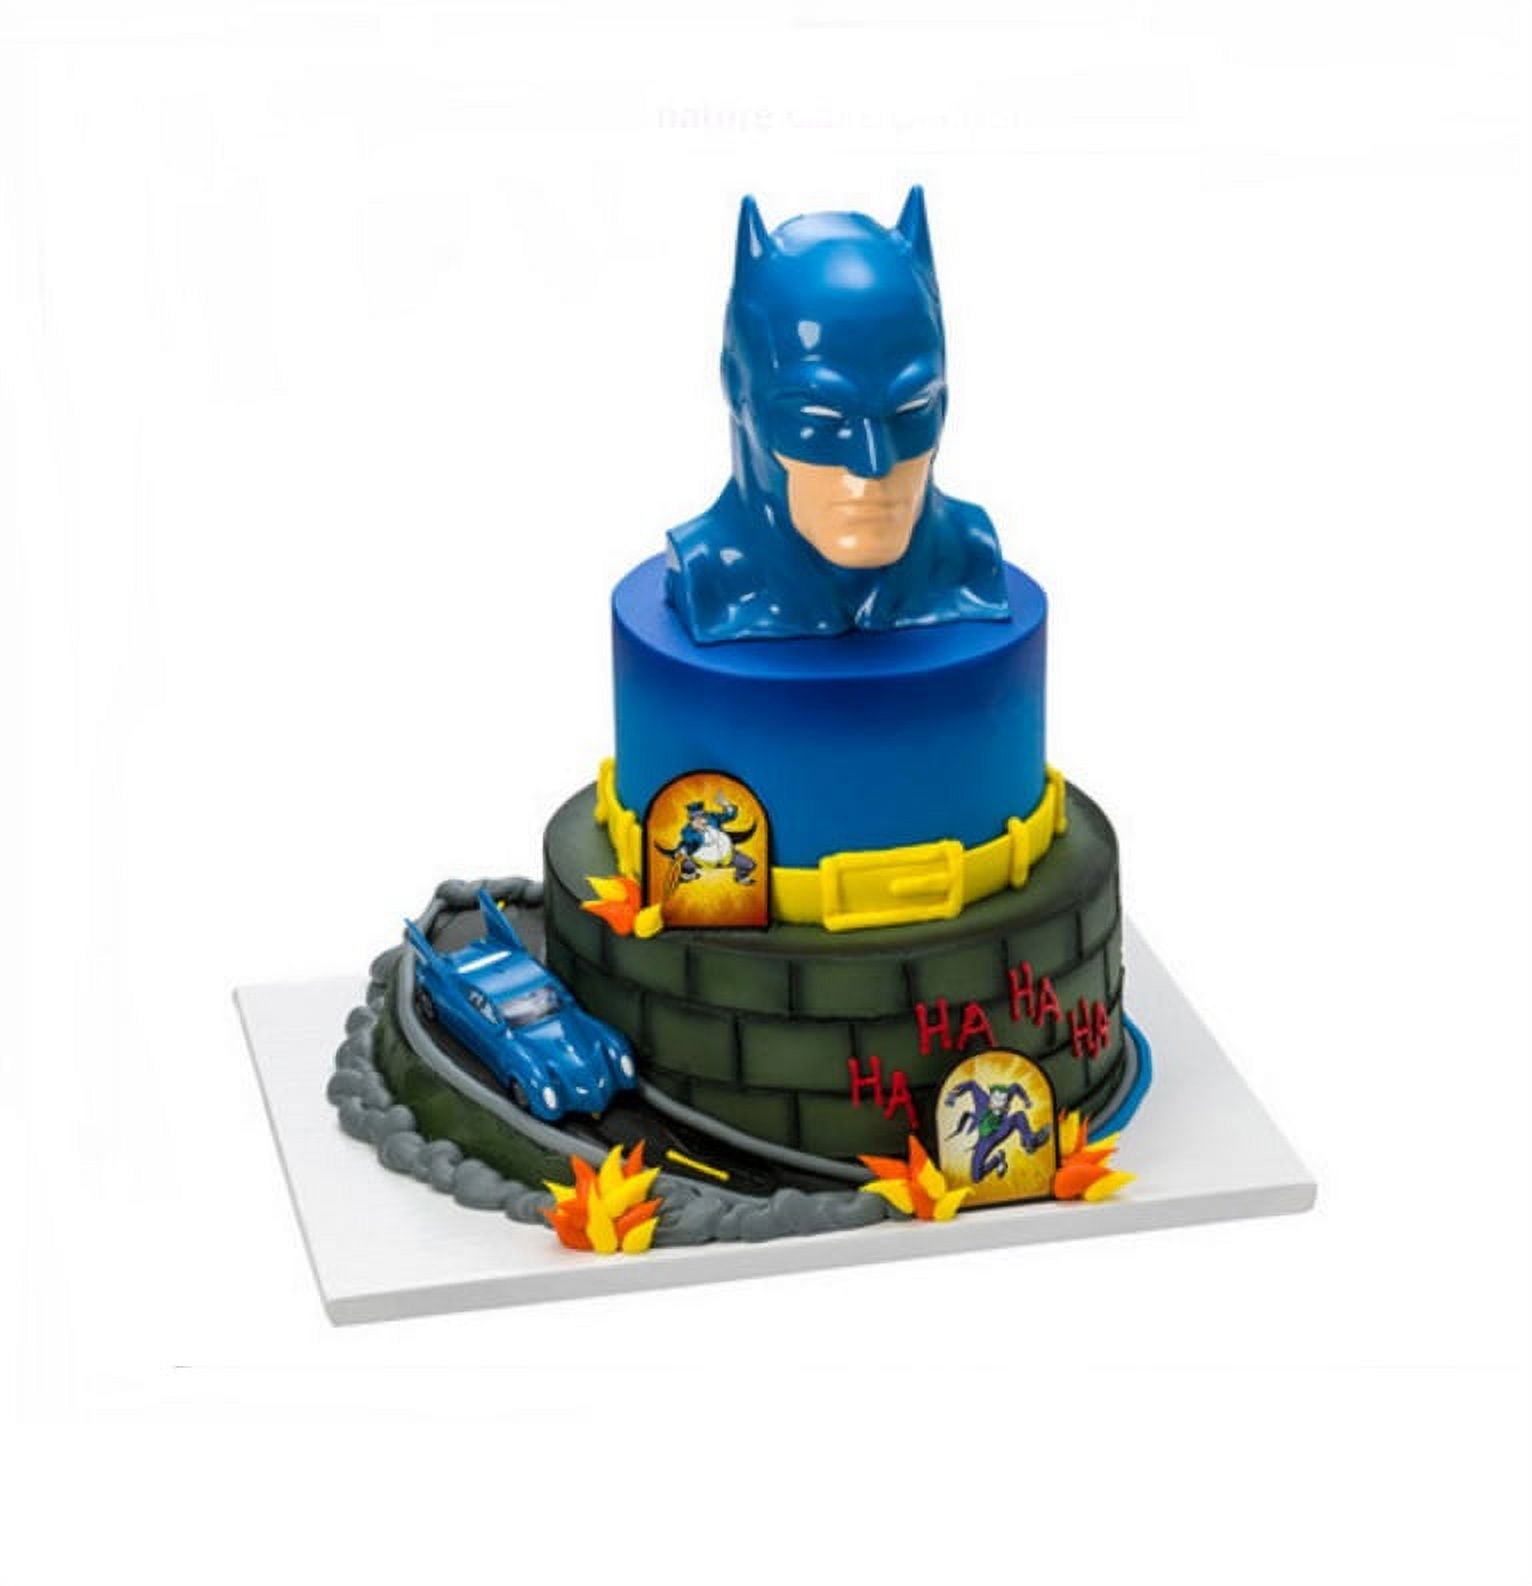 Batman Birthday Cake - Bakery Crafts $25 Giveaway - A Helicopter Mom